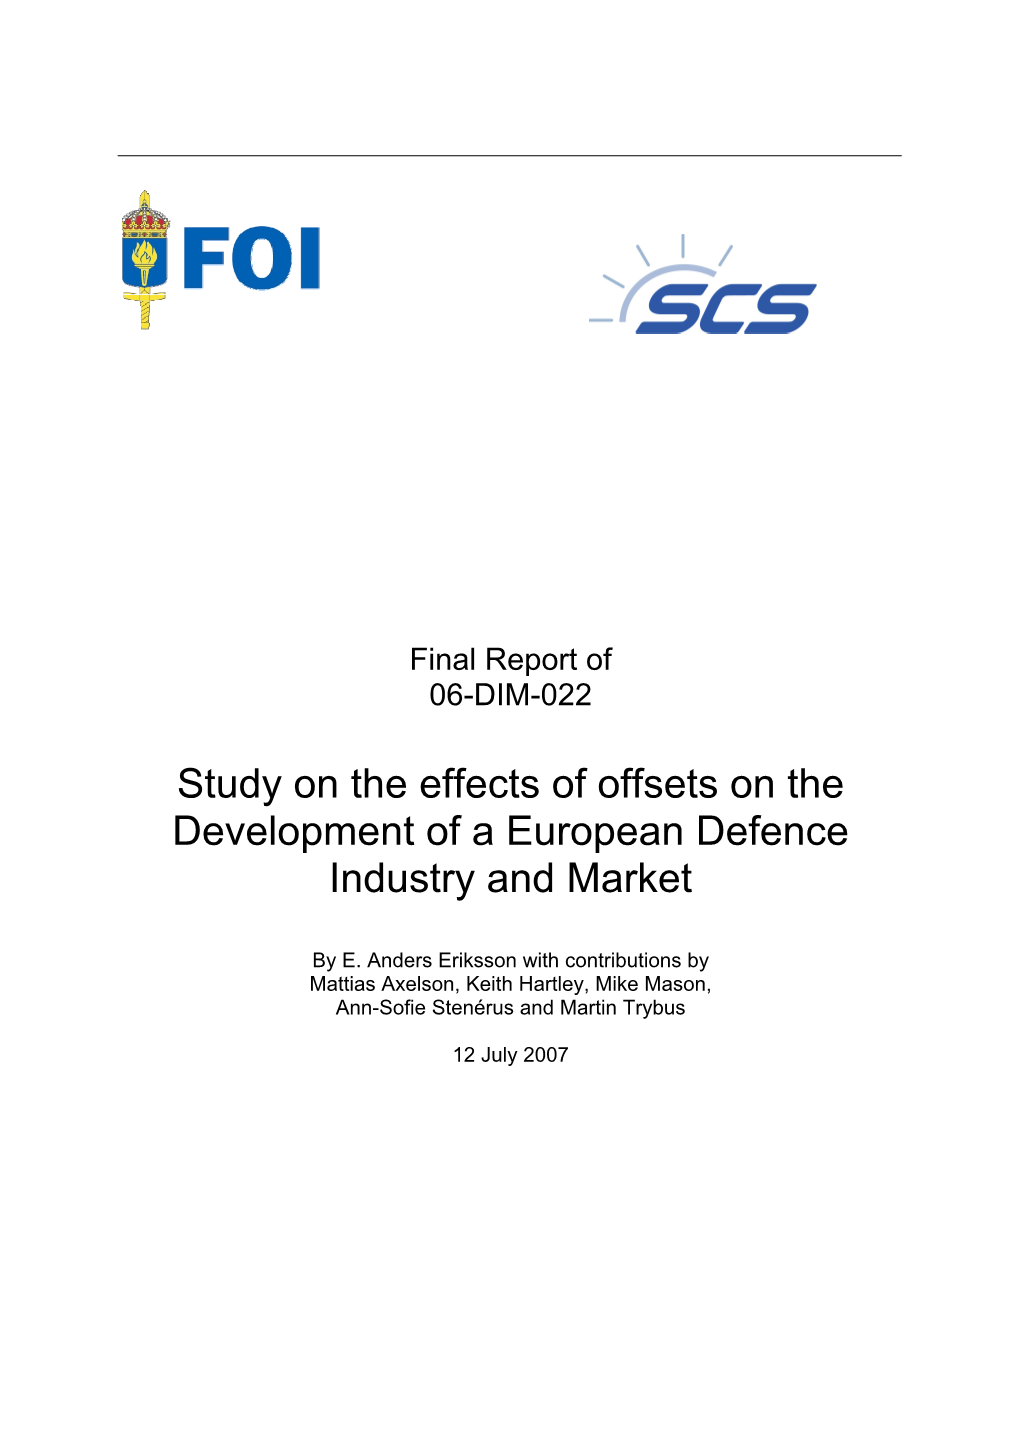 Study on the Effects of Offsets on the Development of a European Defence Industry and Market